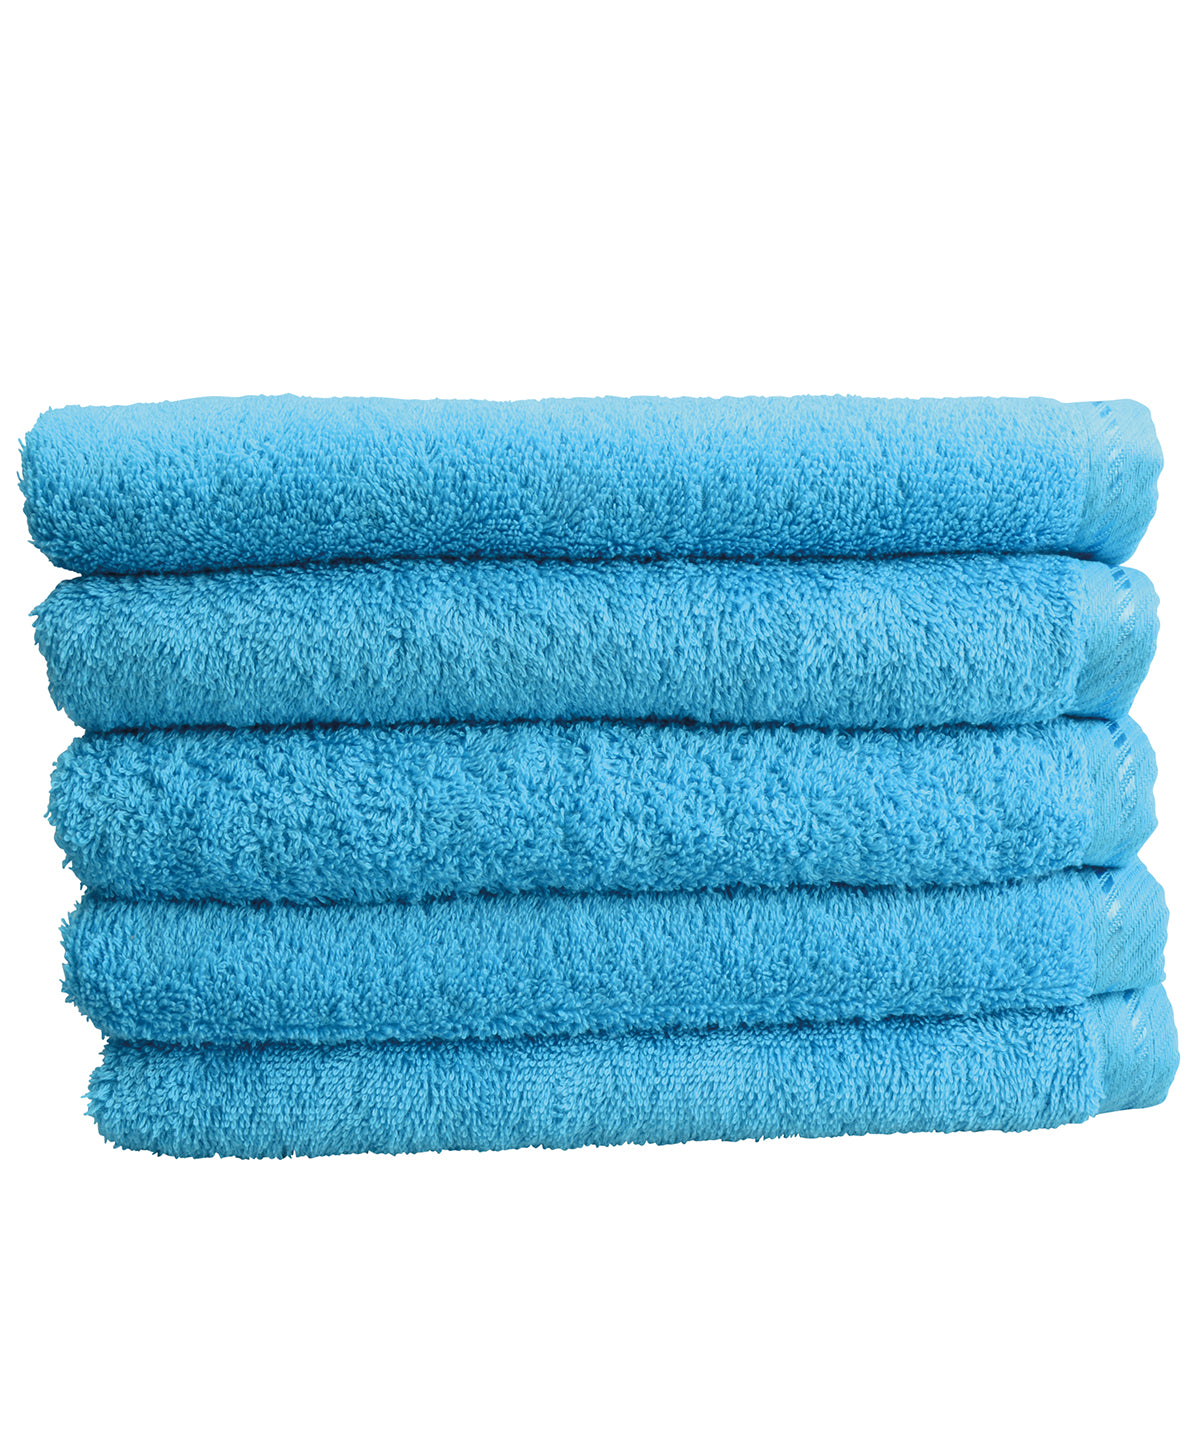 Personalised Towels - Turquoise A&R Towels ARTG® Hand towel